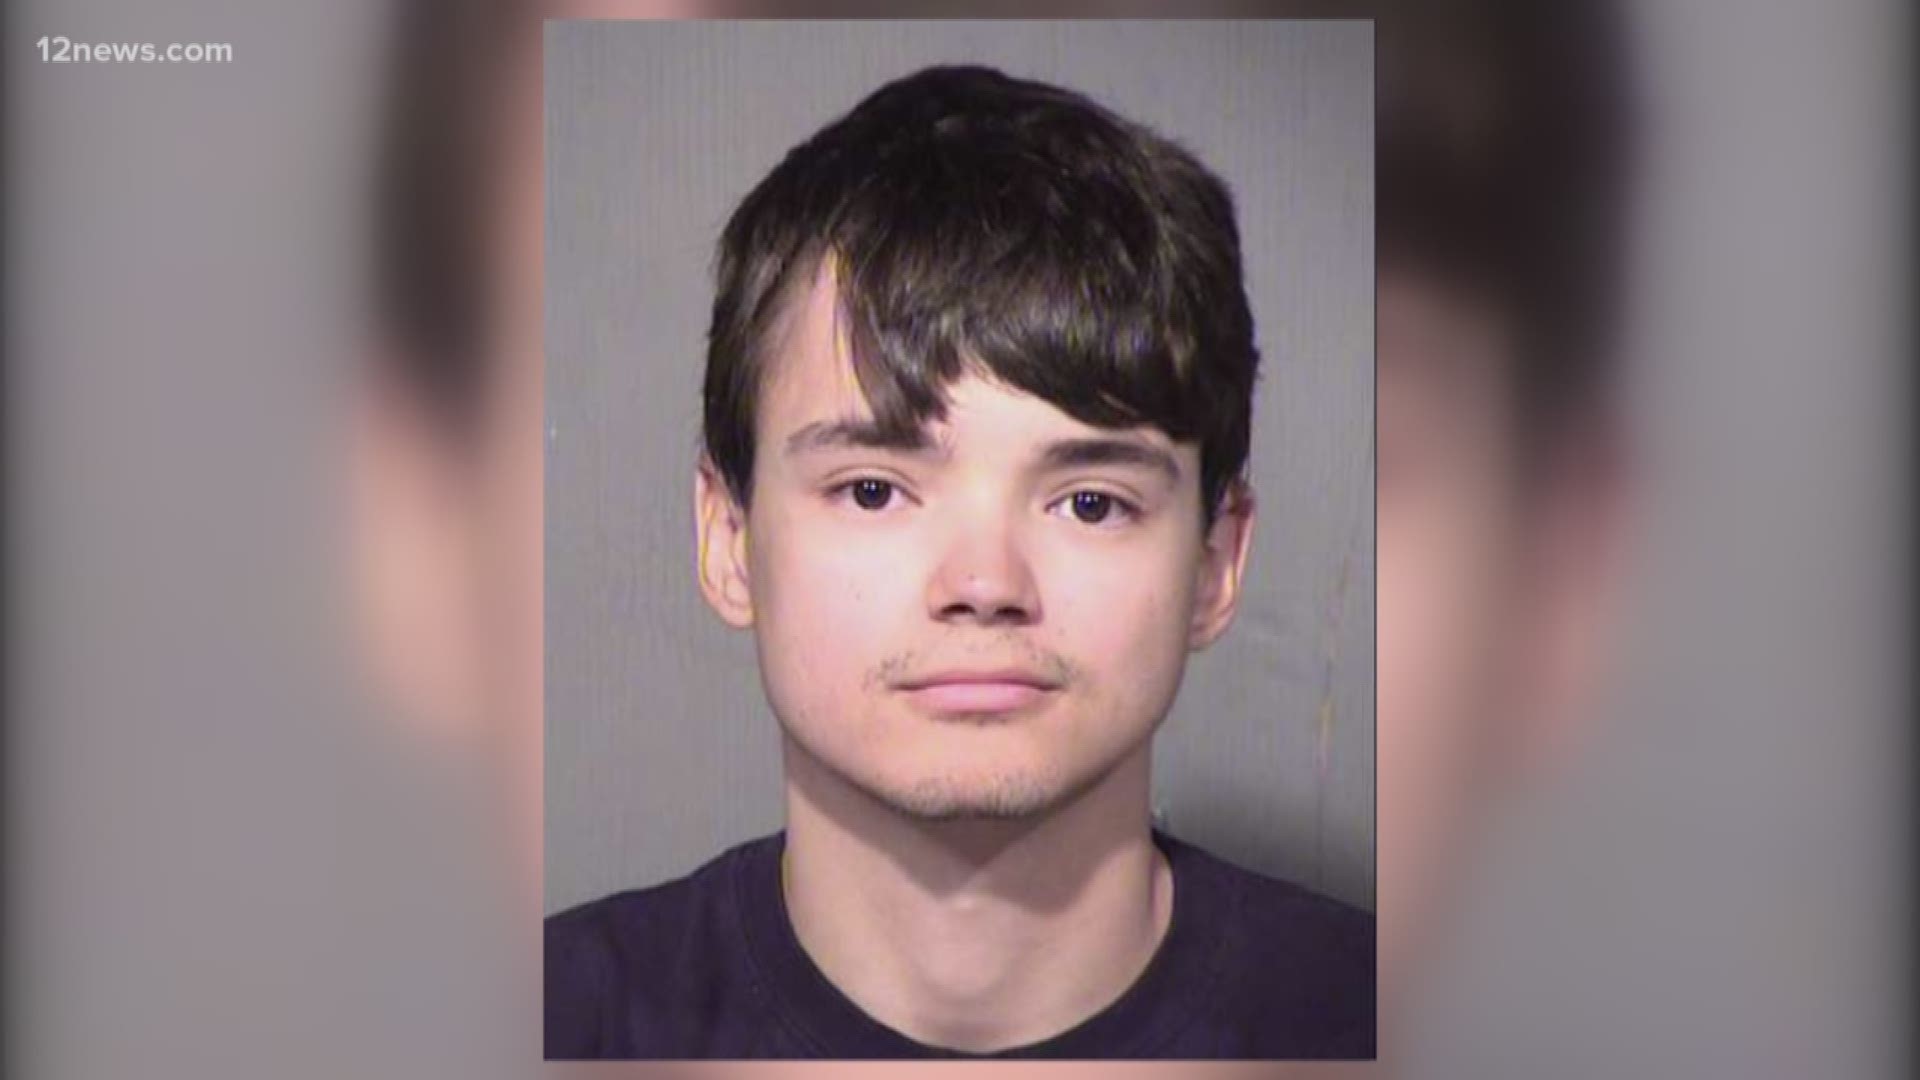 Girl And Boy Sex Video Images - Gilbert man admits to sex with minors, distributing child porn | 12news.com